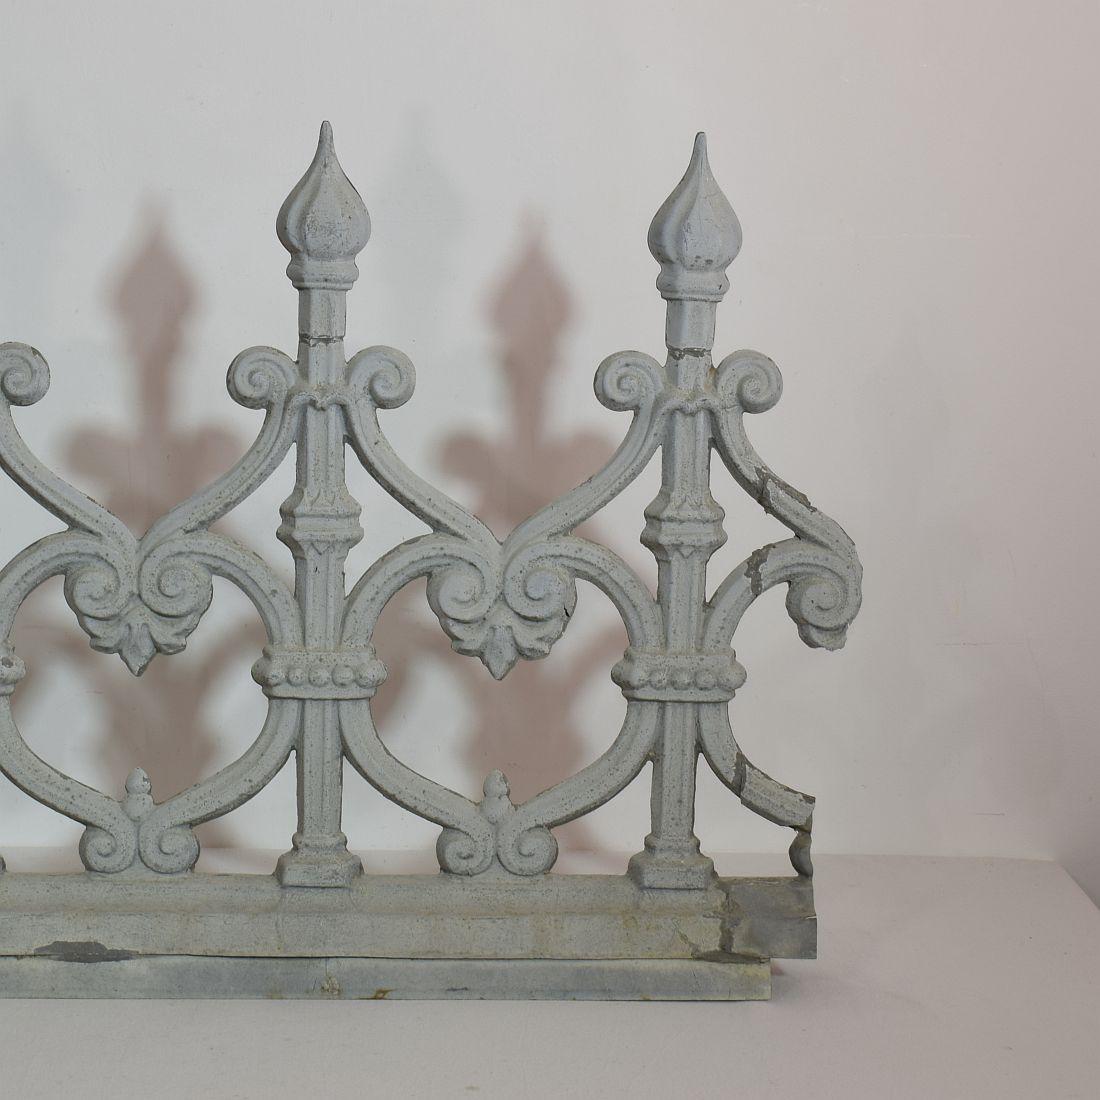 Pair of 19th Century French Zinc Architectural Roof Ornaments or Finials 2